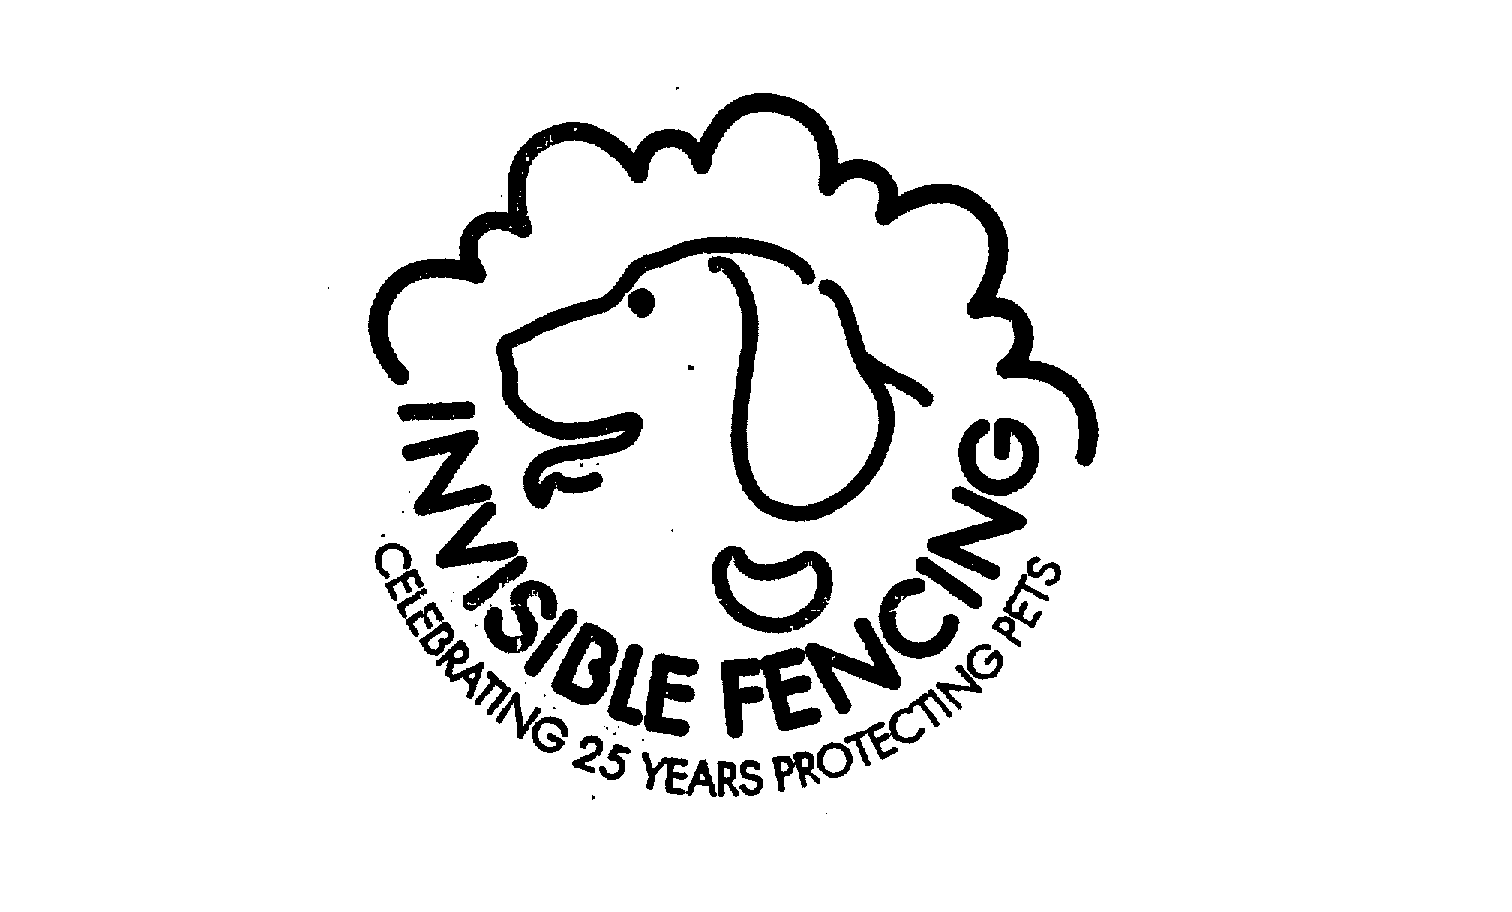  INVISIBLE FENCING CELEBRATING 25 YEARS PROTECTING PETS